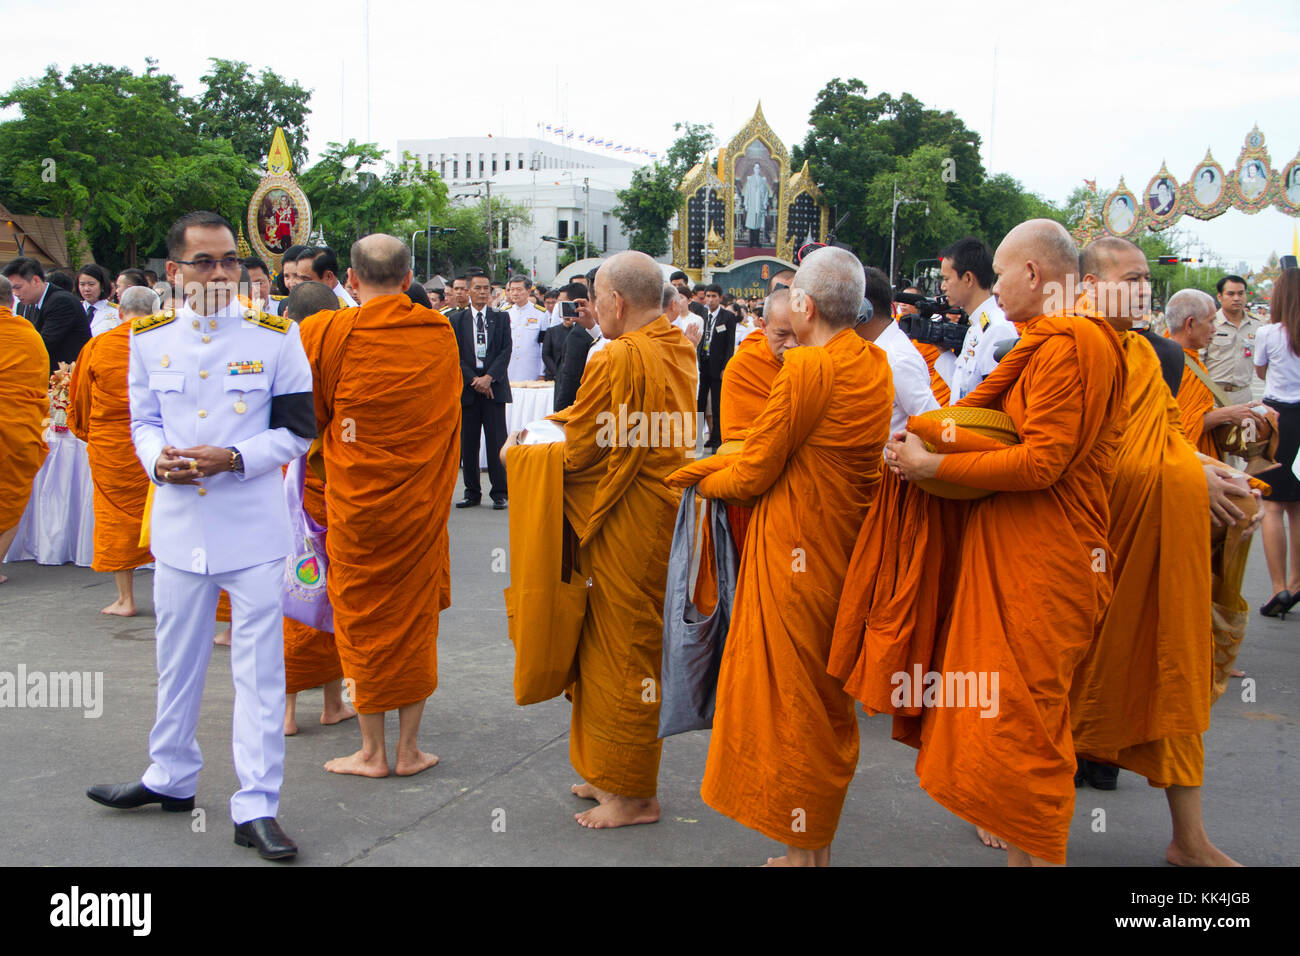 651 Buddhist monks attended the morning alms ceremony along with the Thai Prime Minister at Royal Plaza in Bangkok.Thailand celebrated the birthday of Stock Photo